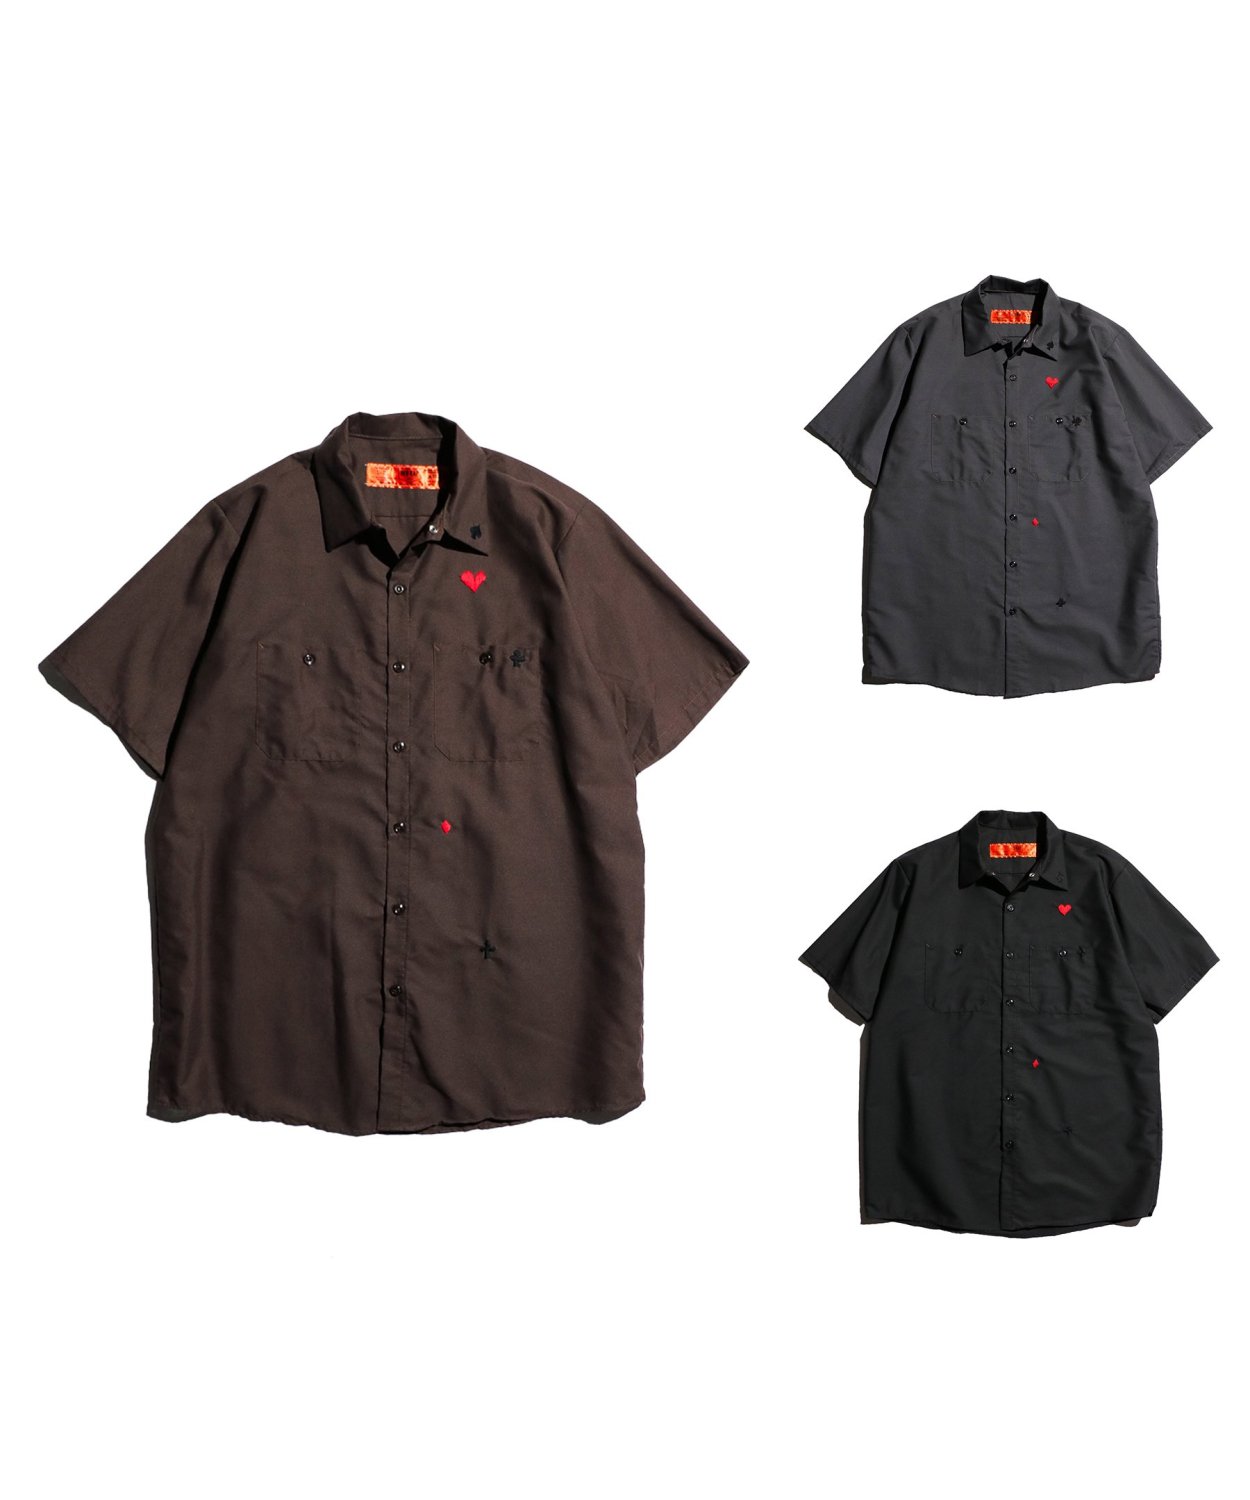 THRIFTY LOOK / RED KAP CASINO EMBROIDERY WORK SHIRTS